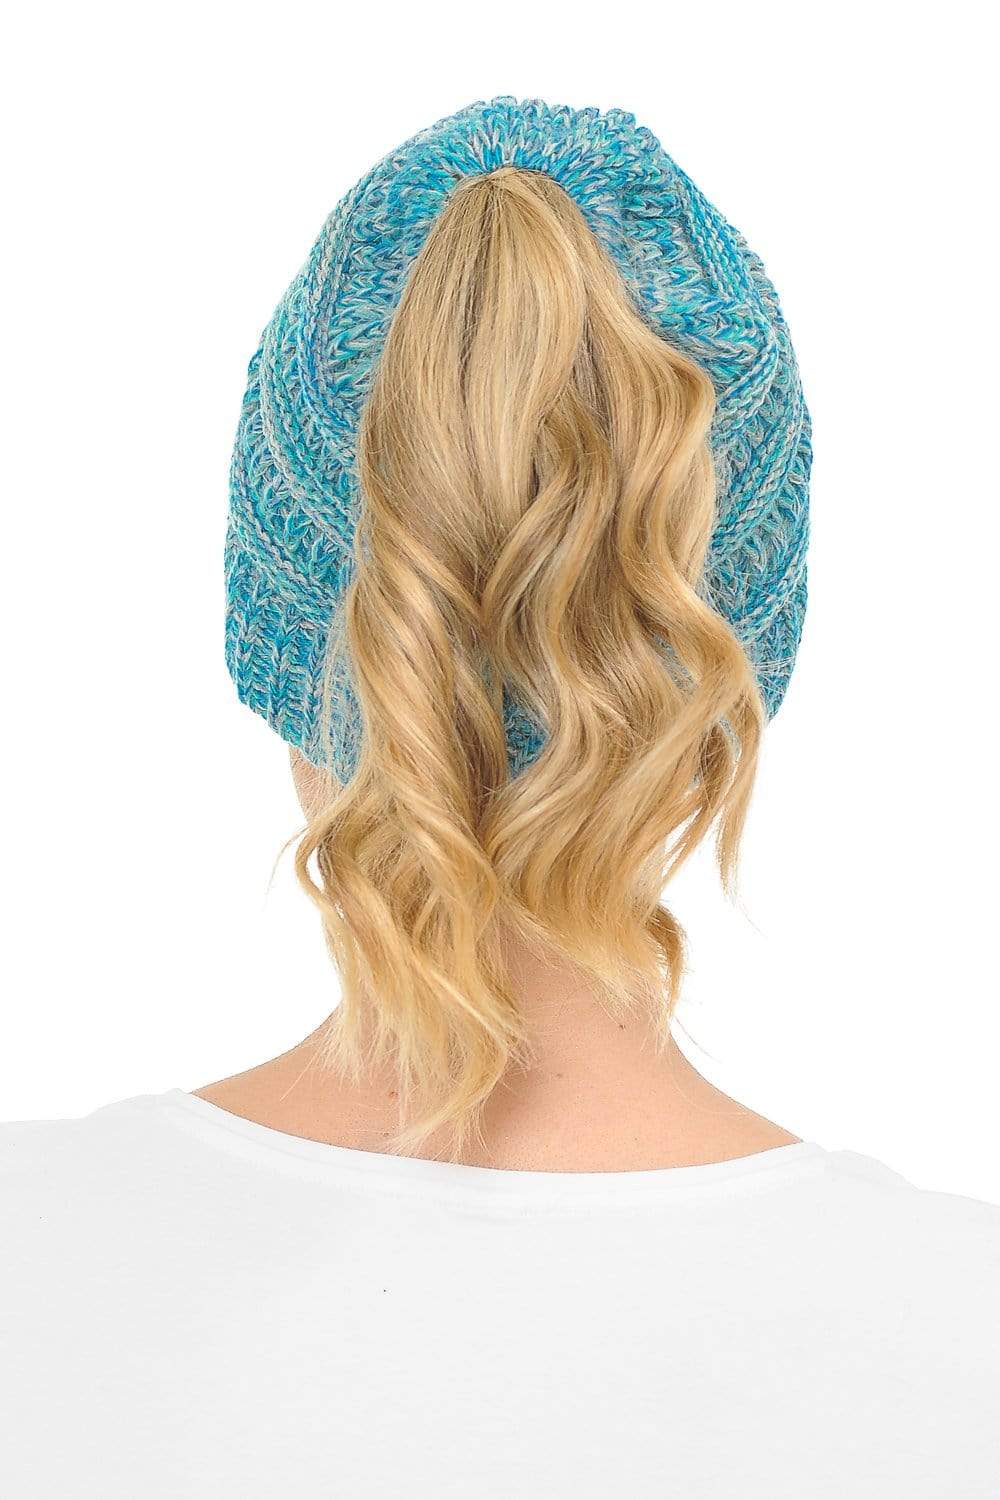 C.C Apparel C.C MB816 - Soft Stretch Cable Knit Warm Ponytail Hat 4 Toned Mixed Multi Color Beanie